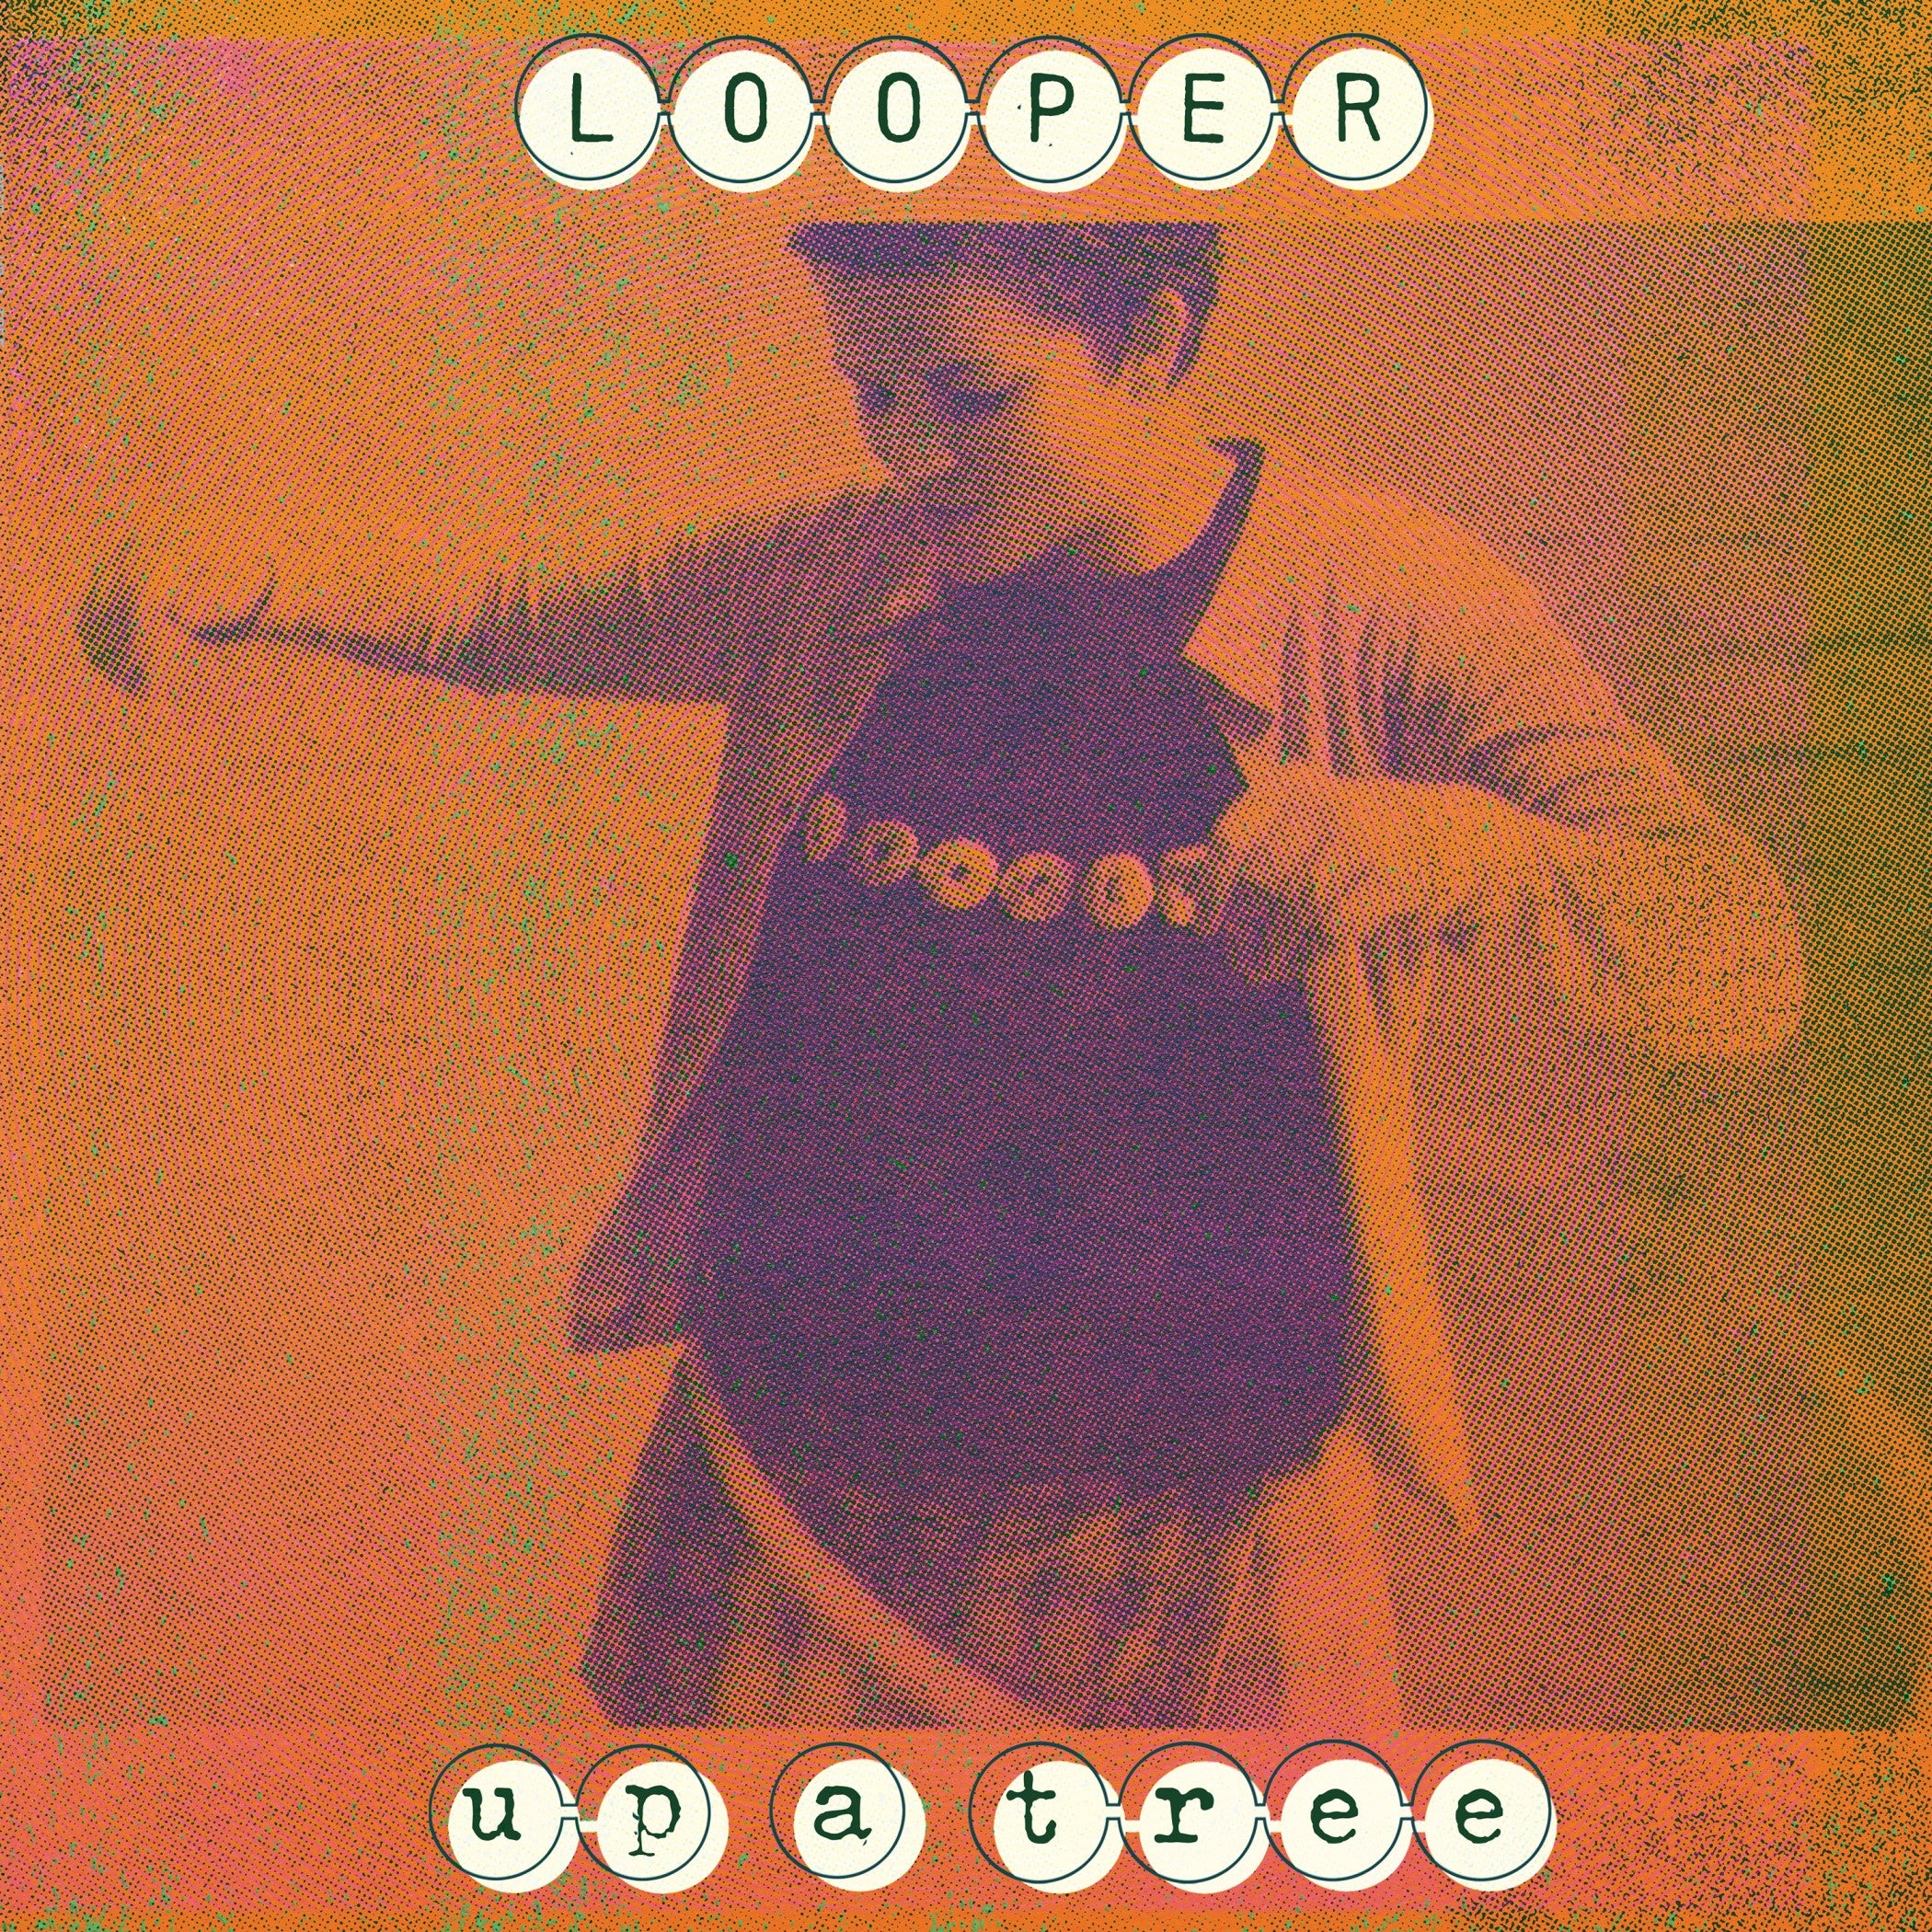 Looper - Up a Tree (25th Anniversary Edition): 2CD